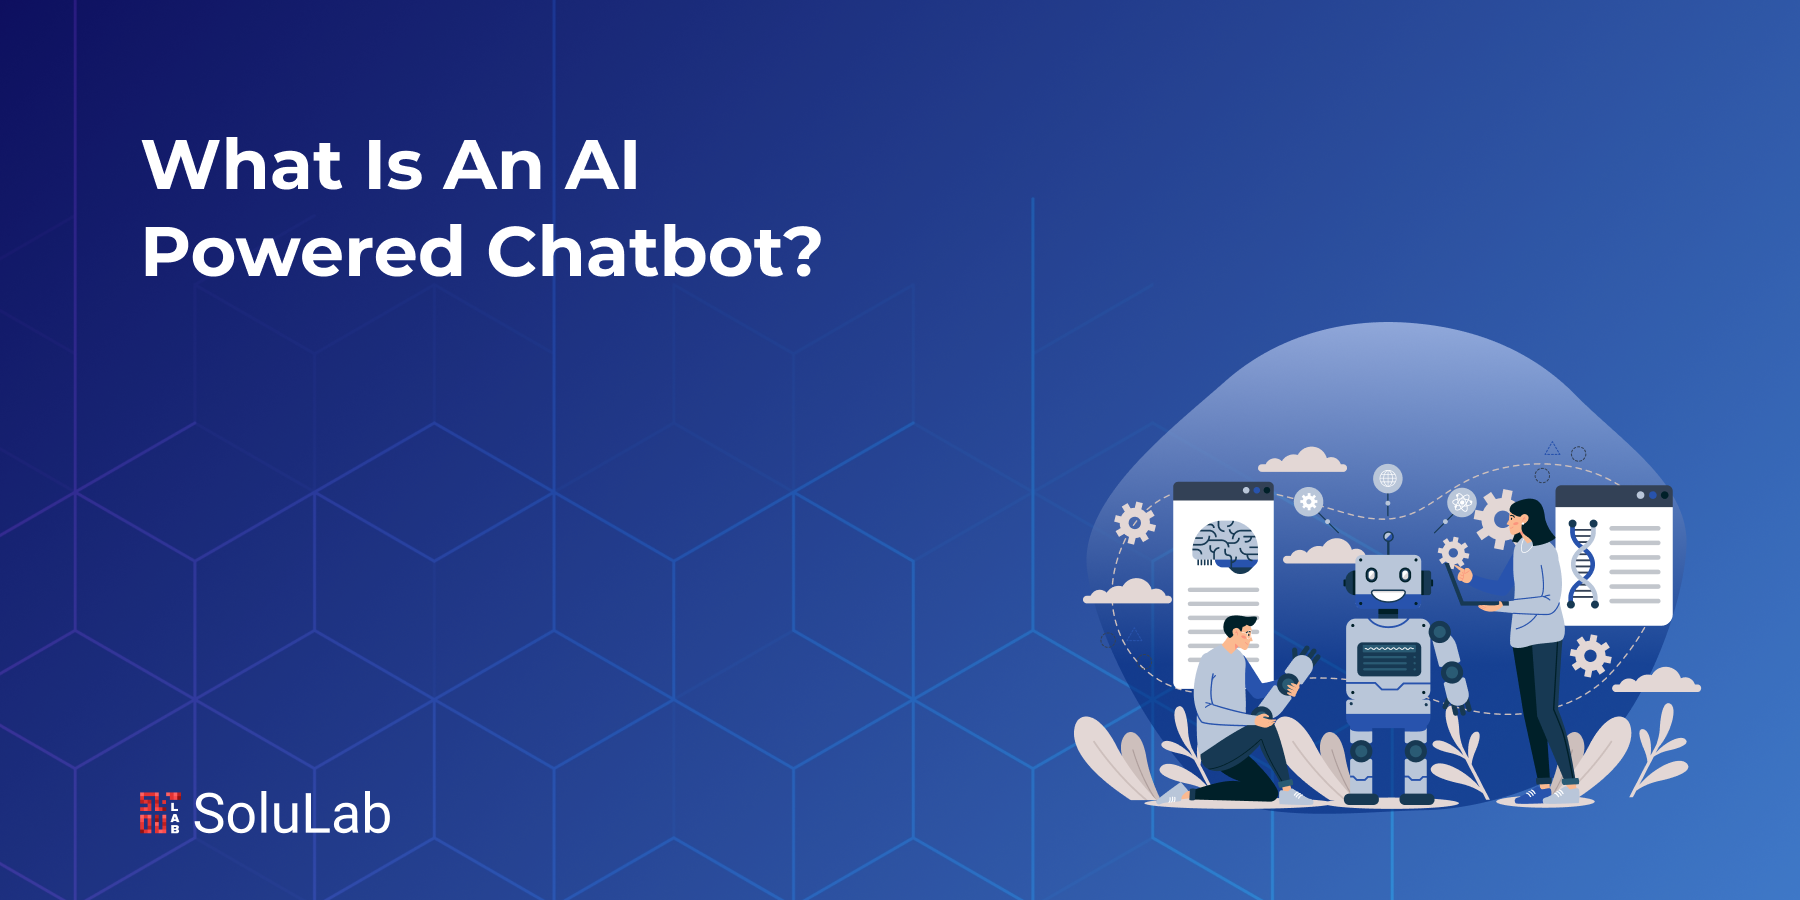 What is an AI Powered Chatbot?